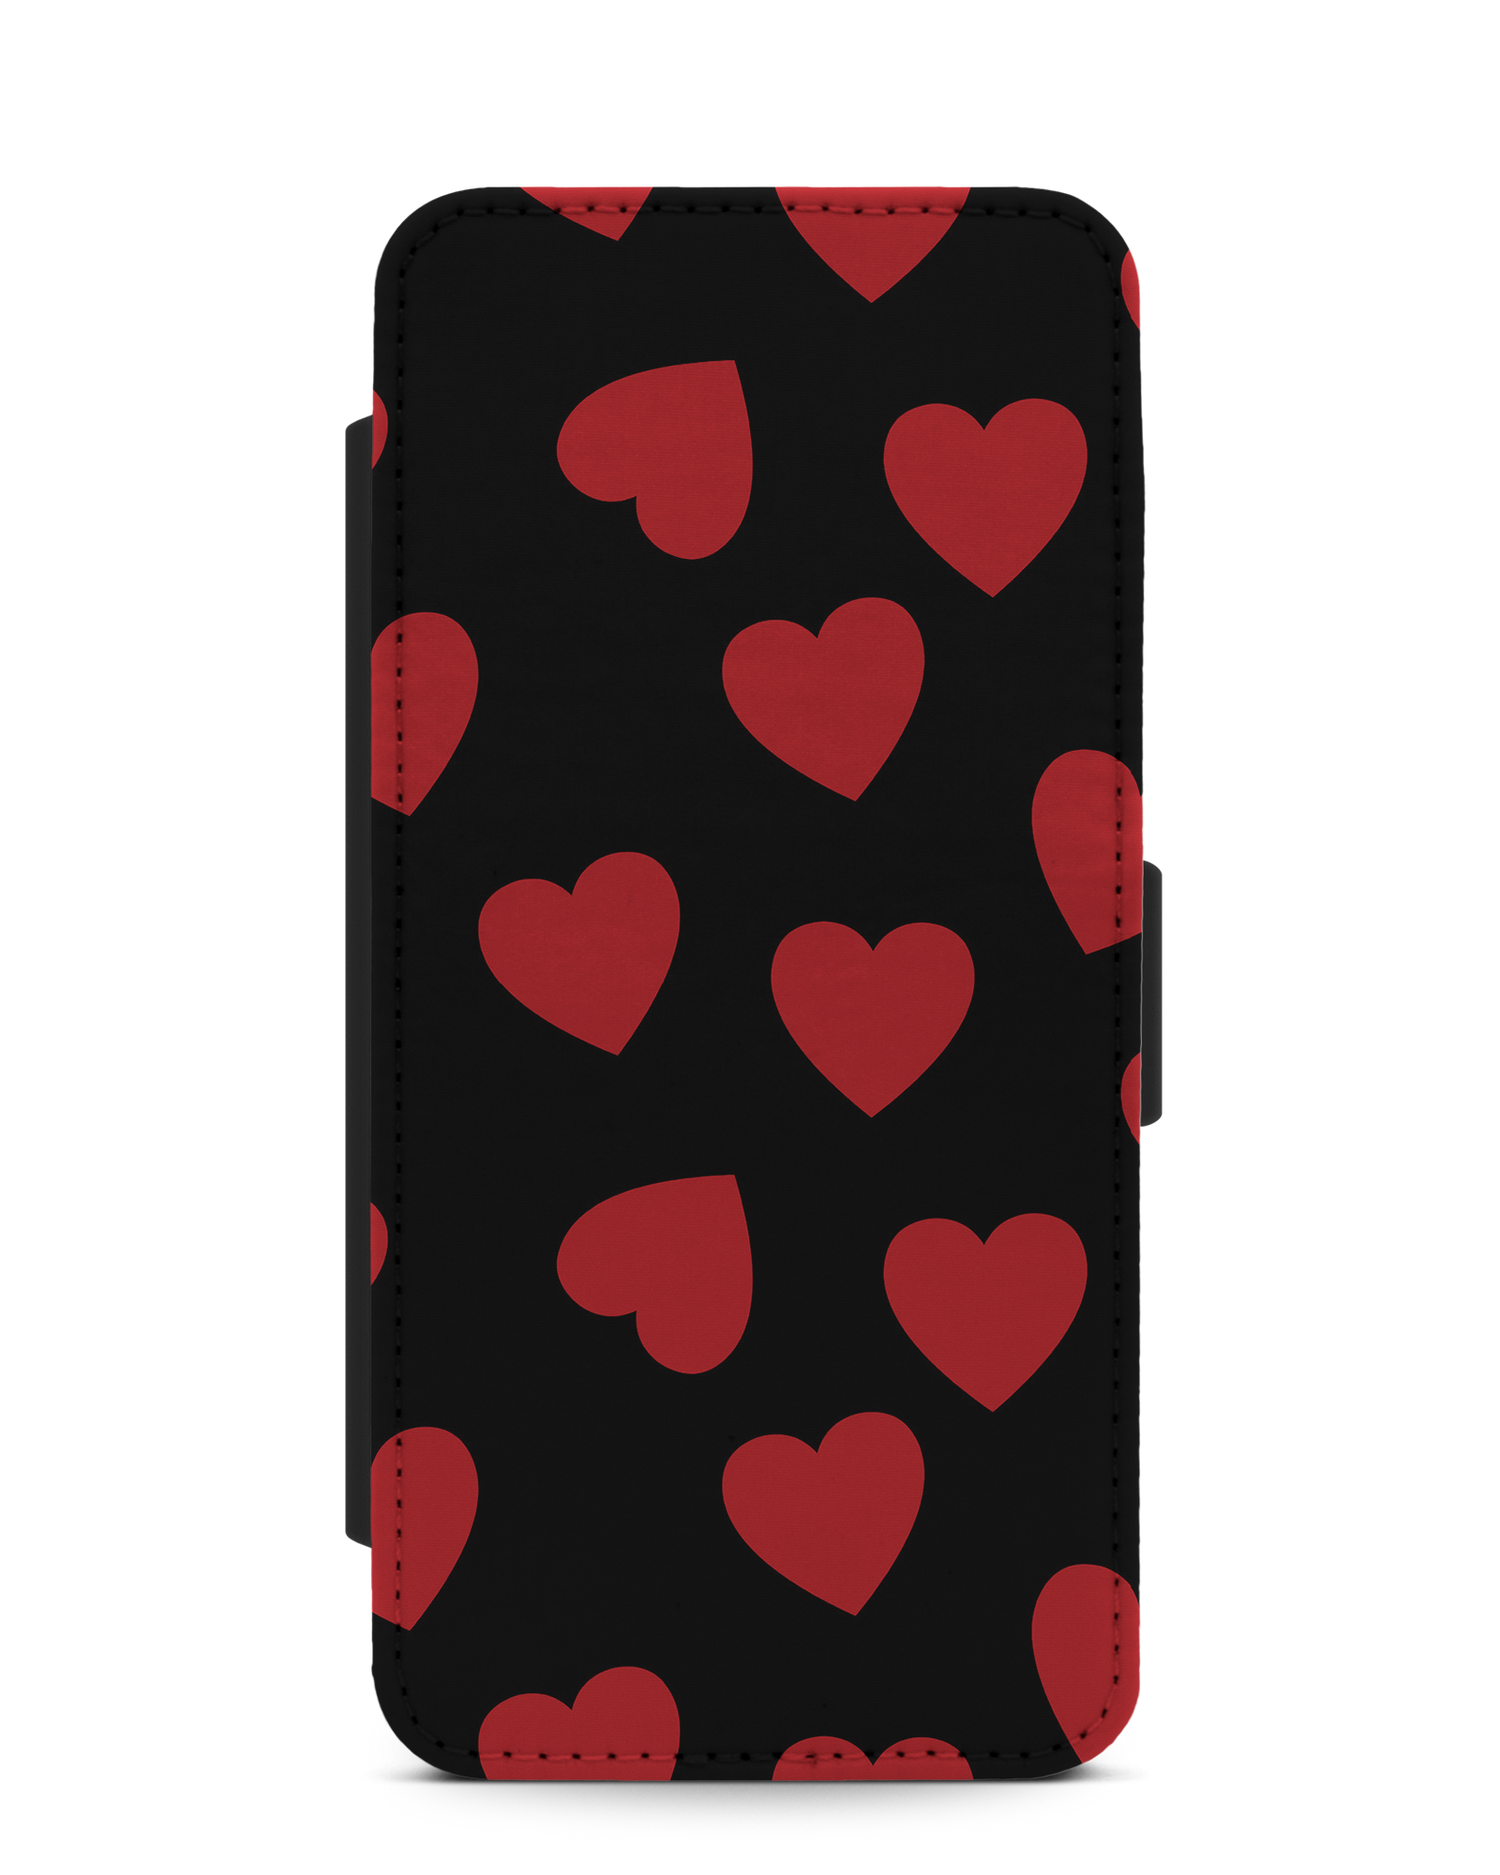 Repeating Hearts Wallet Phone Case Samsung Galaxy S10: Front View